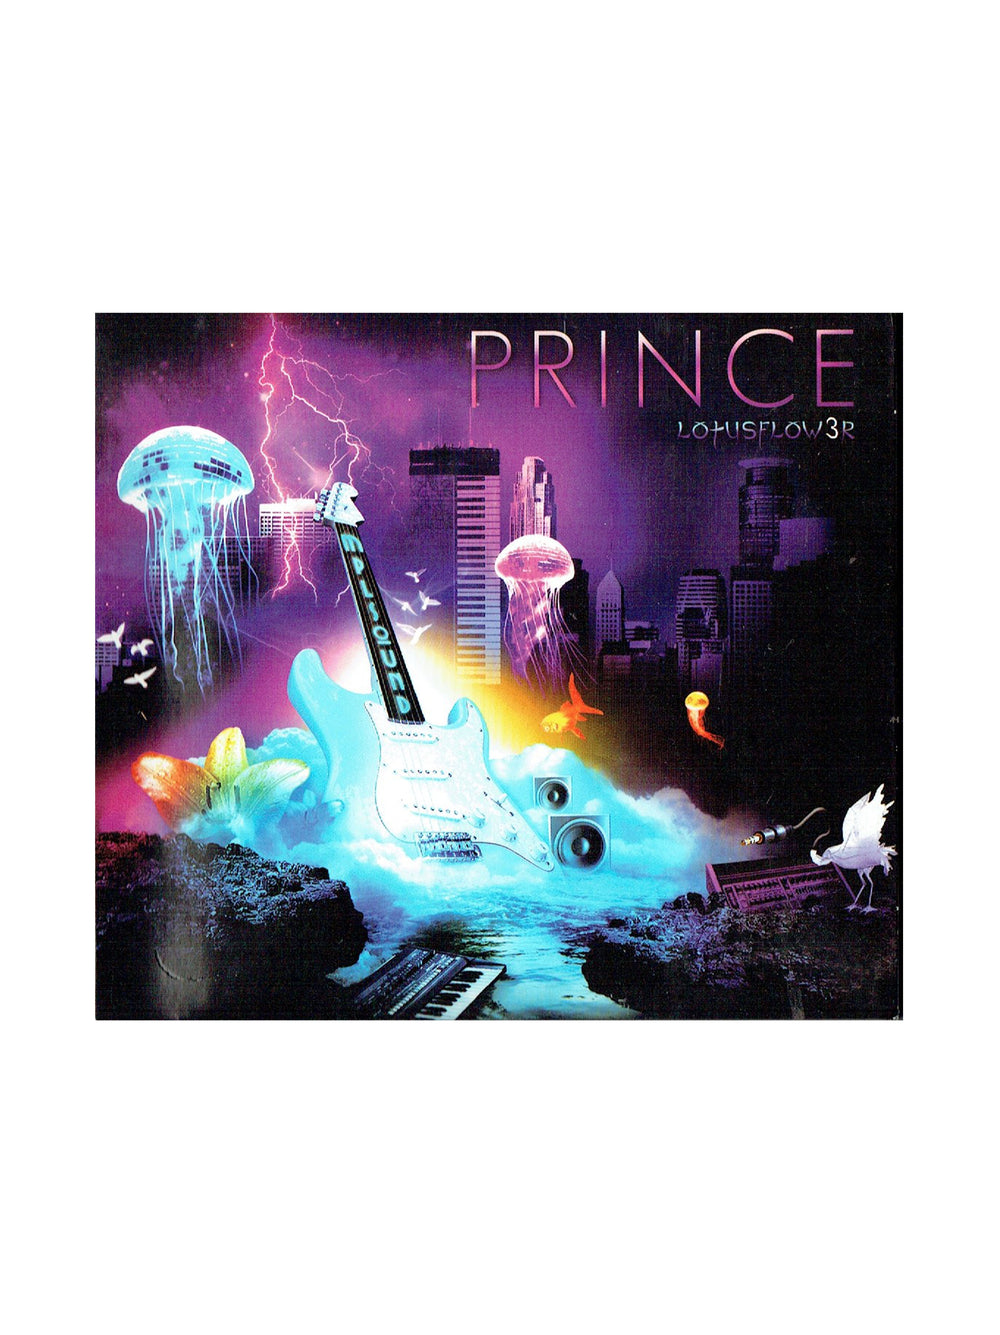 Prince – (MPLSound) Lotus Flow3r Single Compact Disc Album With Poster